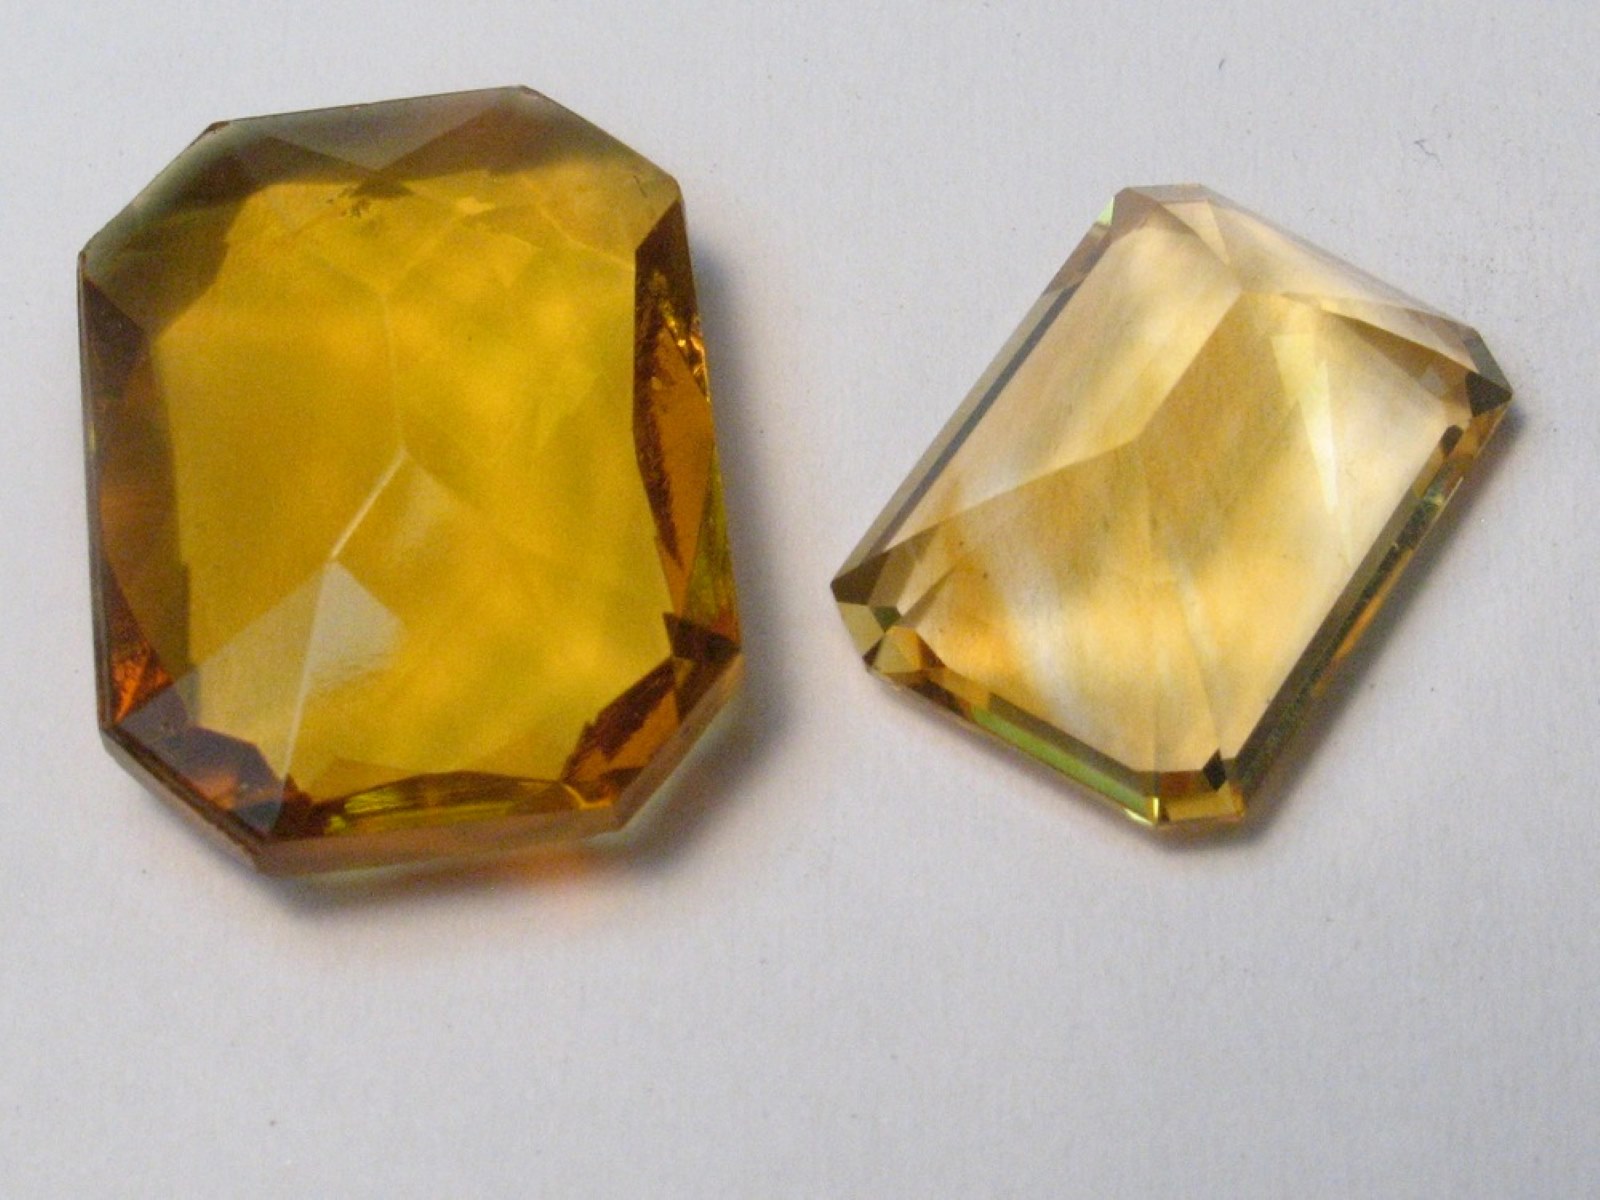 How To Tell If A Gem Is Real Or Glass